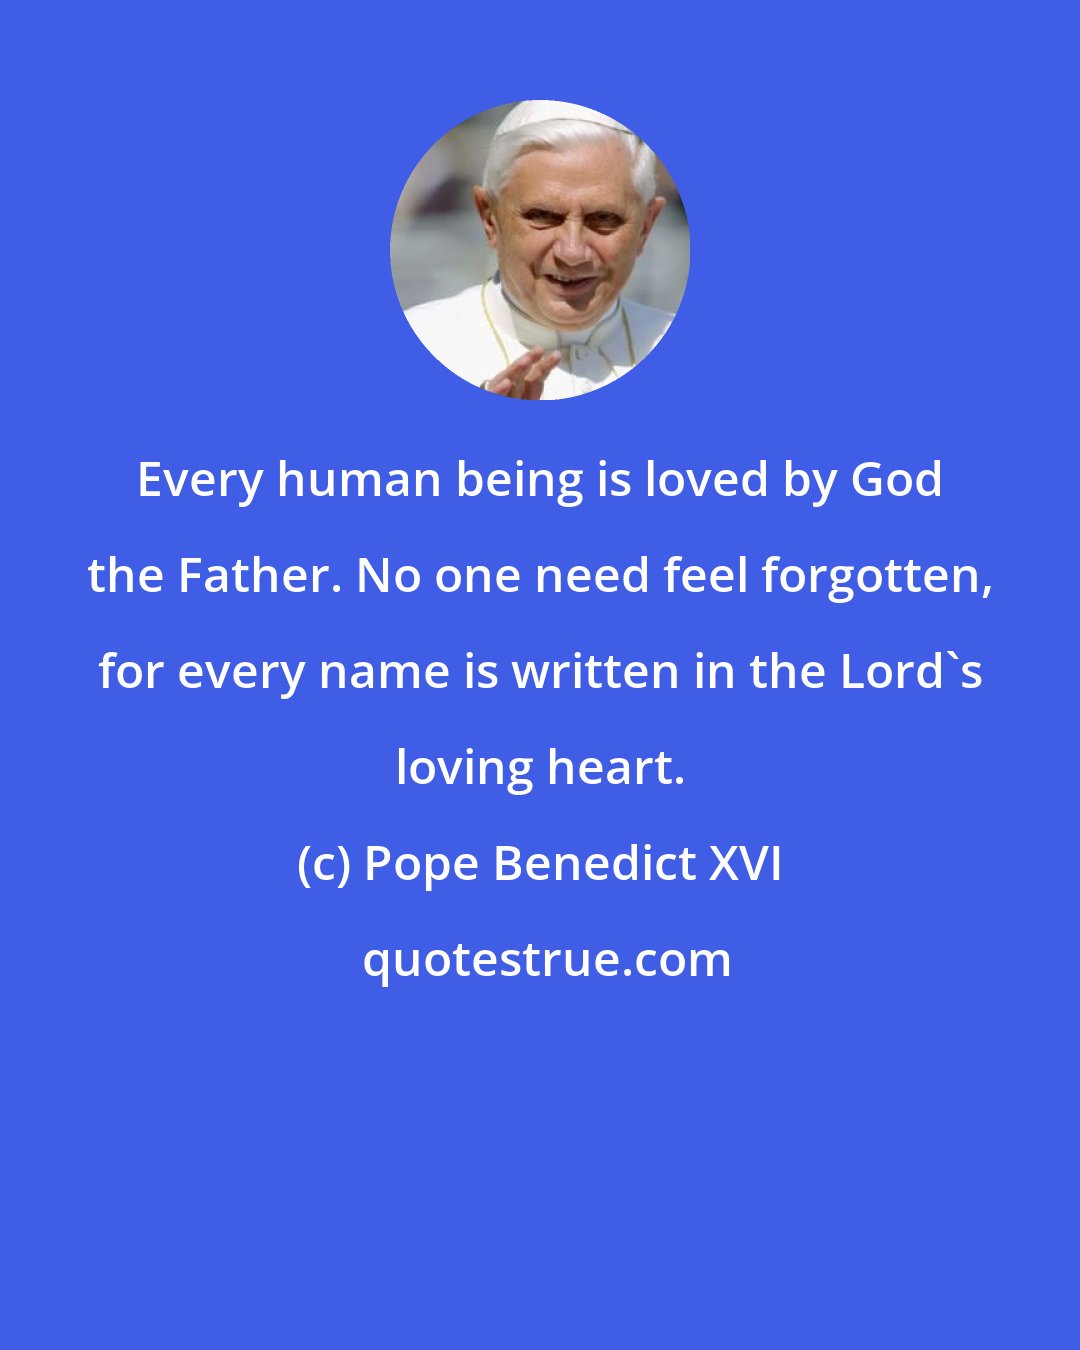 Pope Benedict XVI: Every human being is loved by God the Father. No one need feel forgotten, for every name is written in the Lord's loving heart.